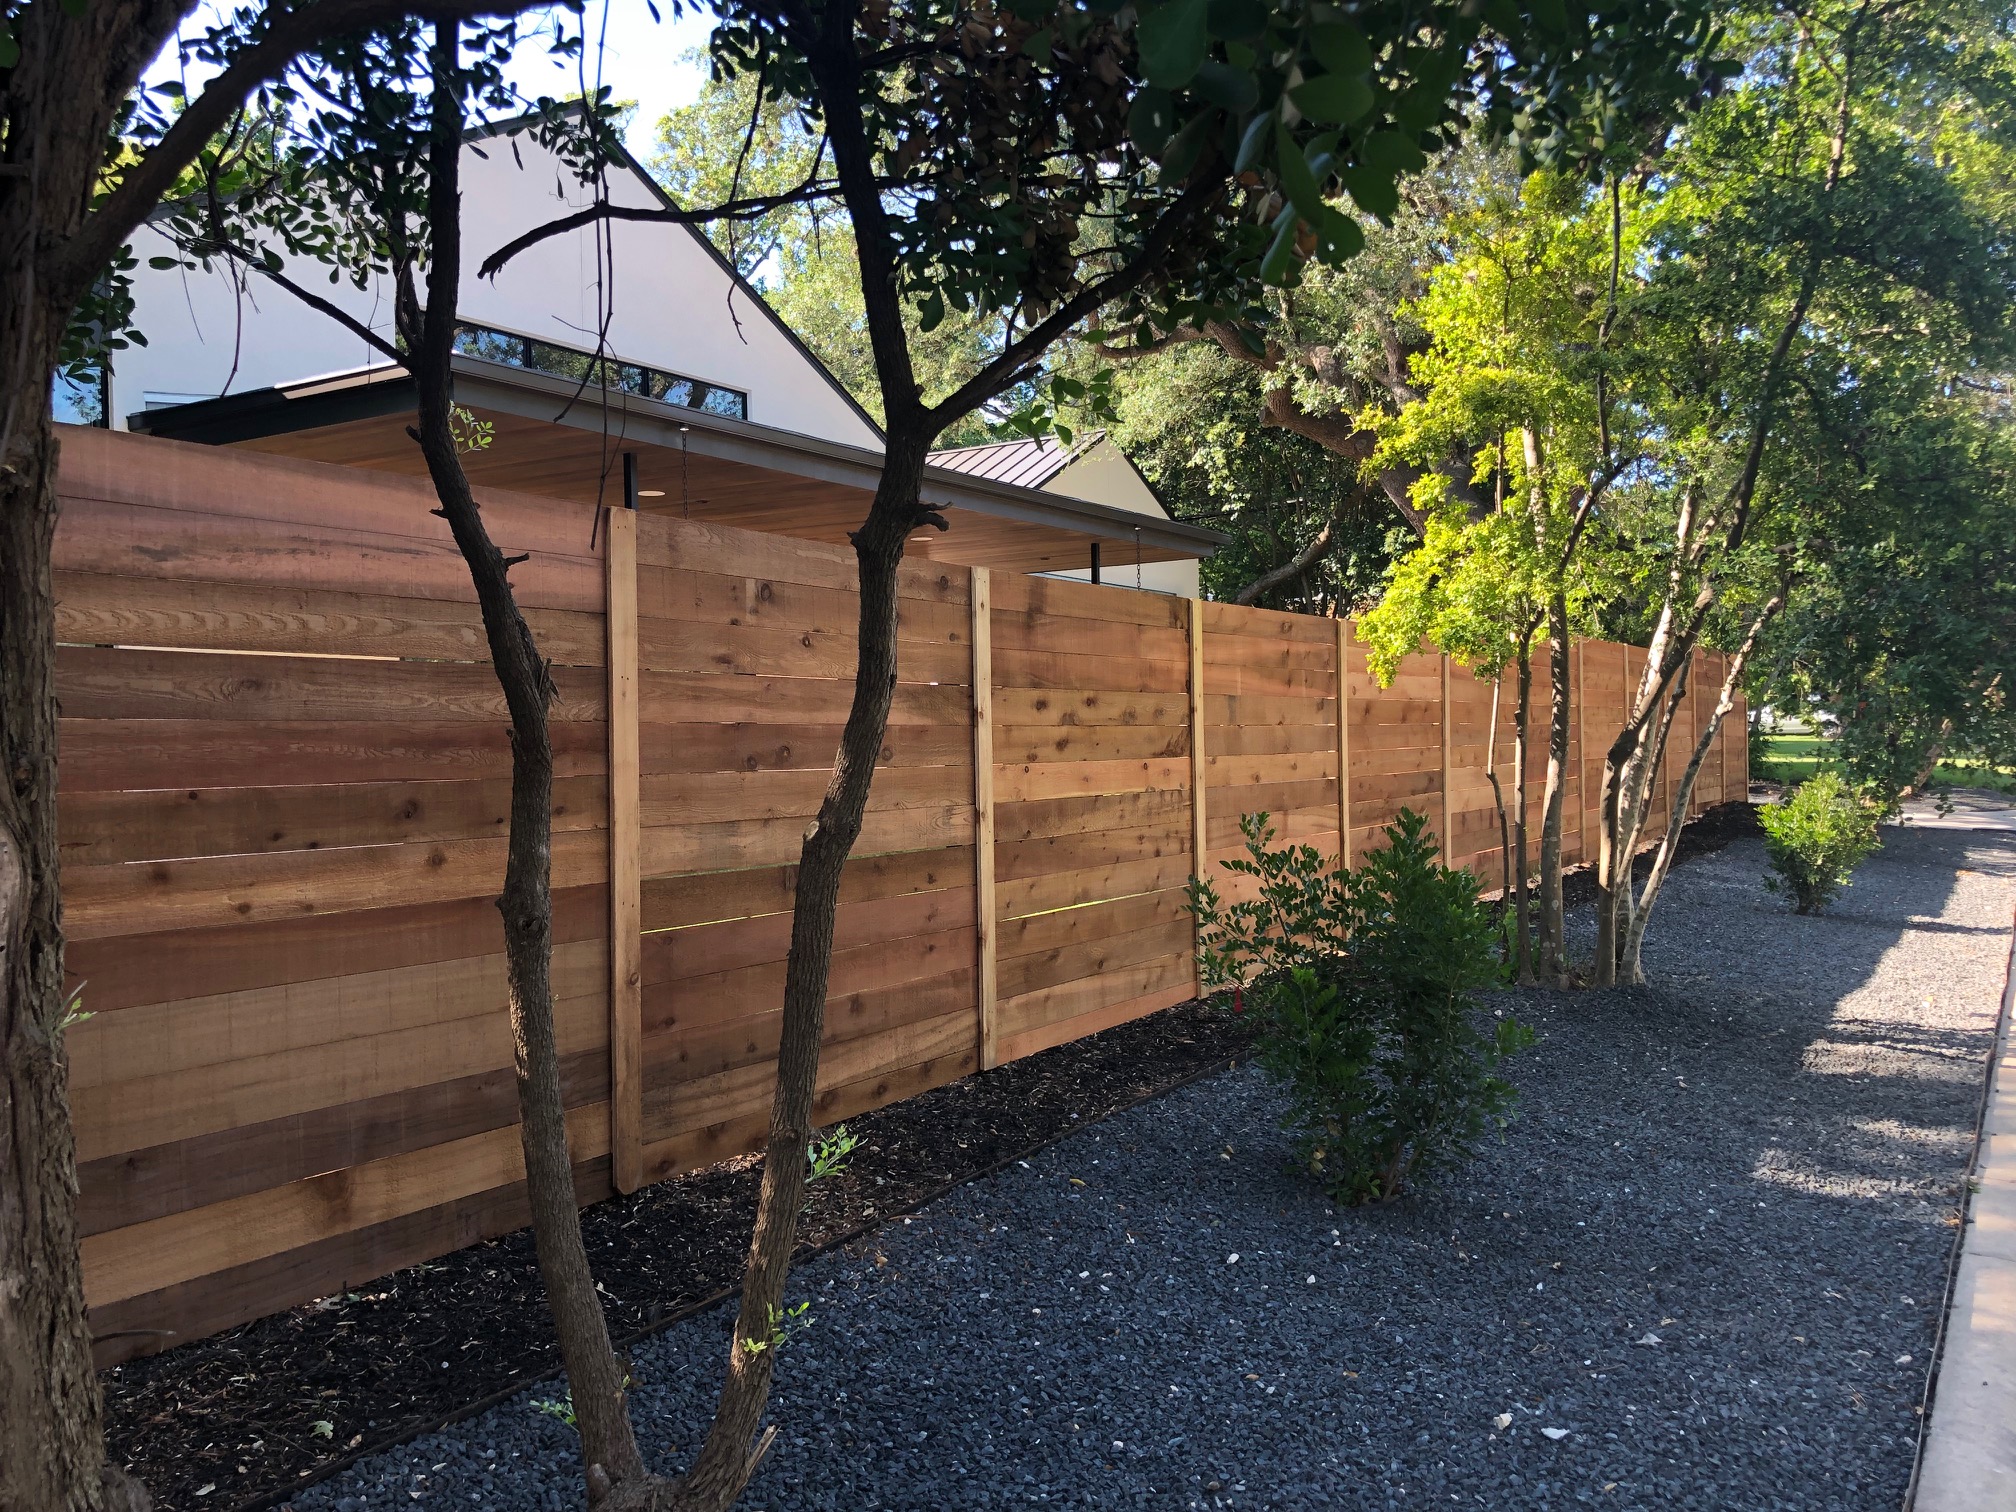 Is a Horizontal Fence Right For You? (Here Are Some Things to